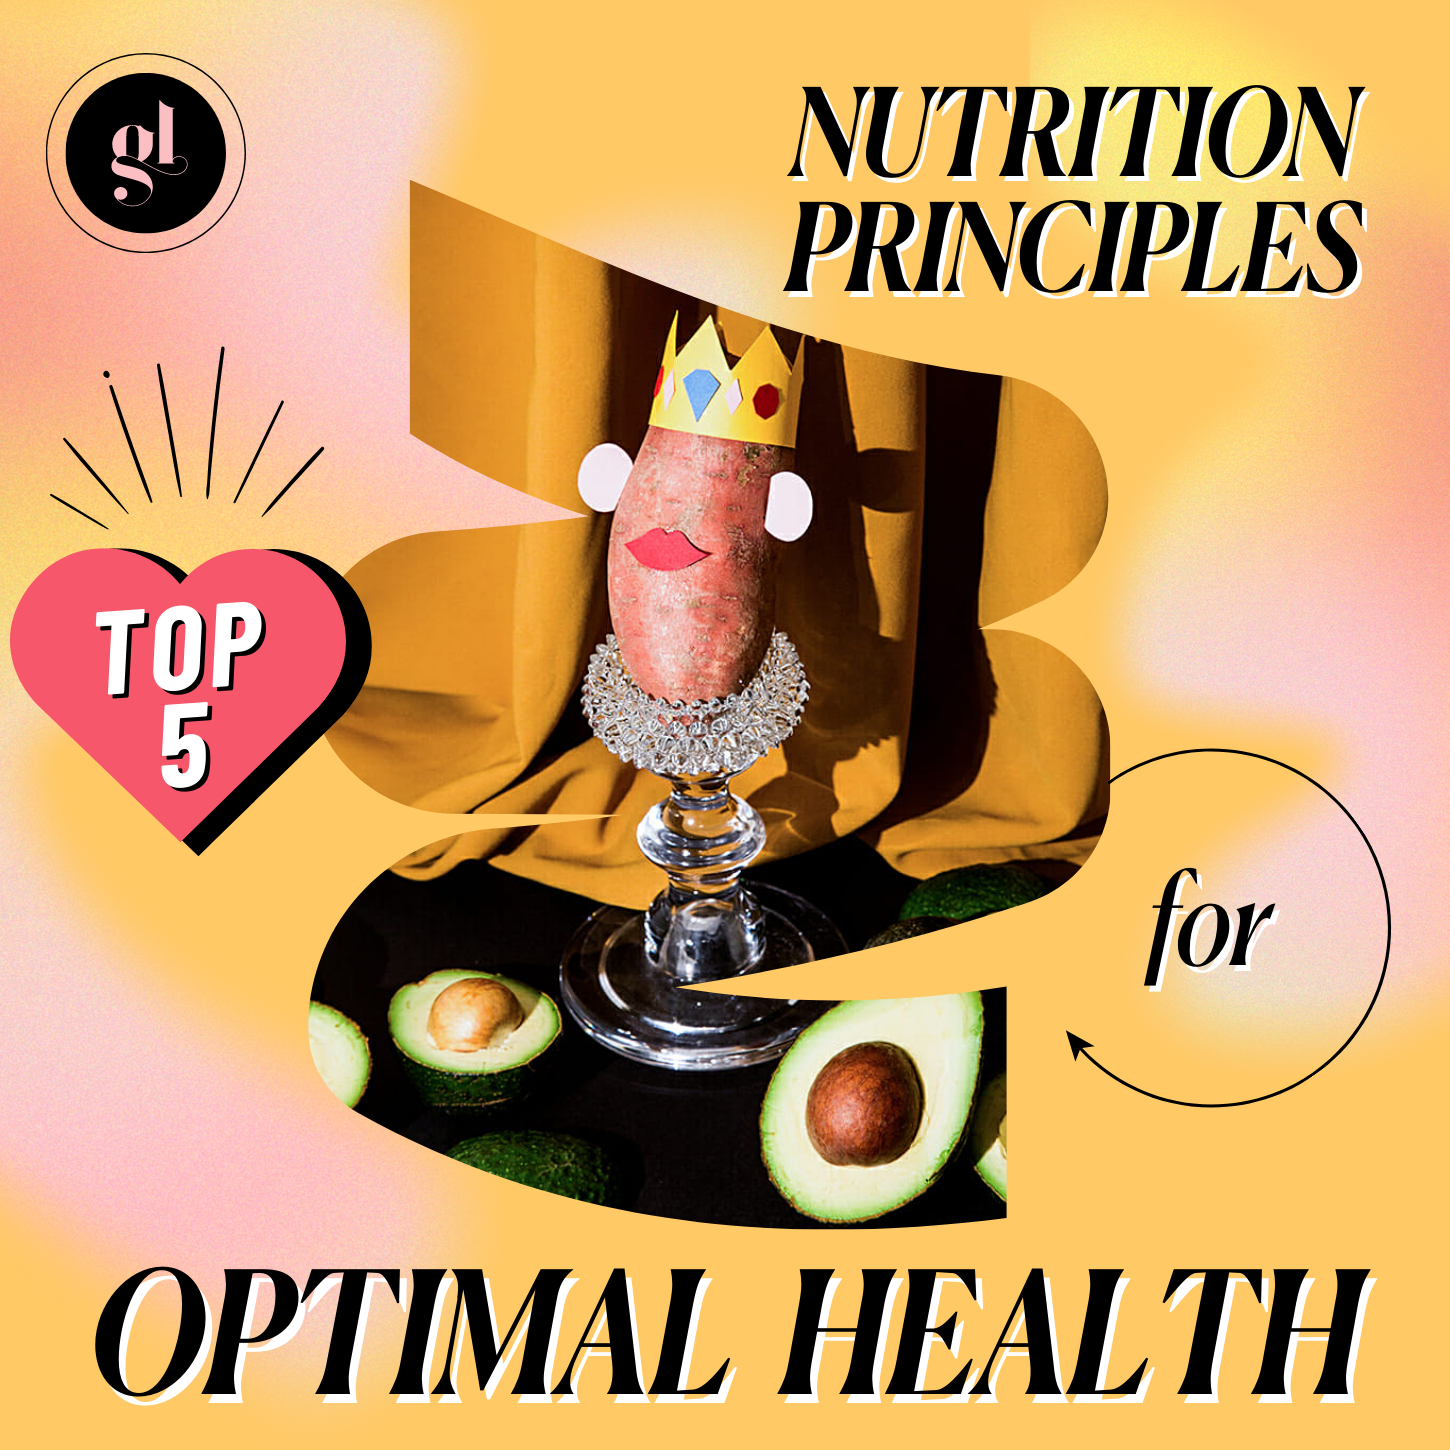 Top 5 Nutrition Principles for Optimal Health